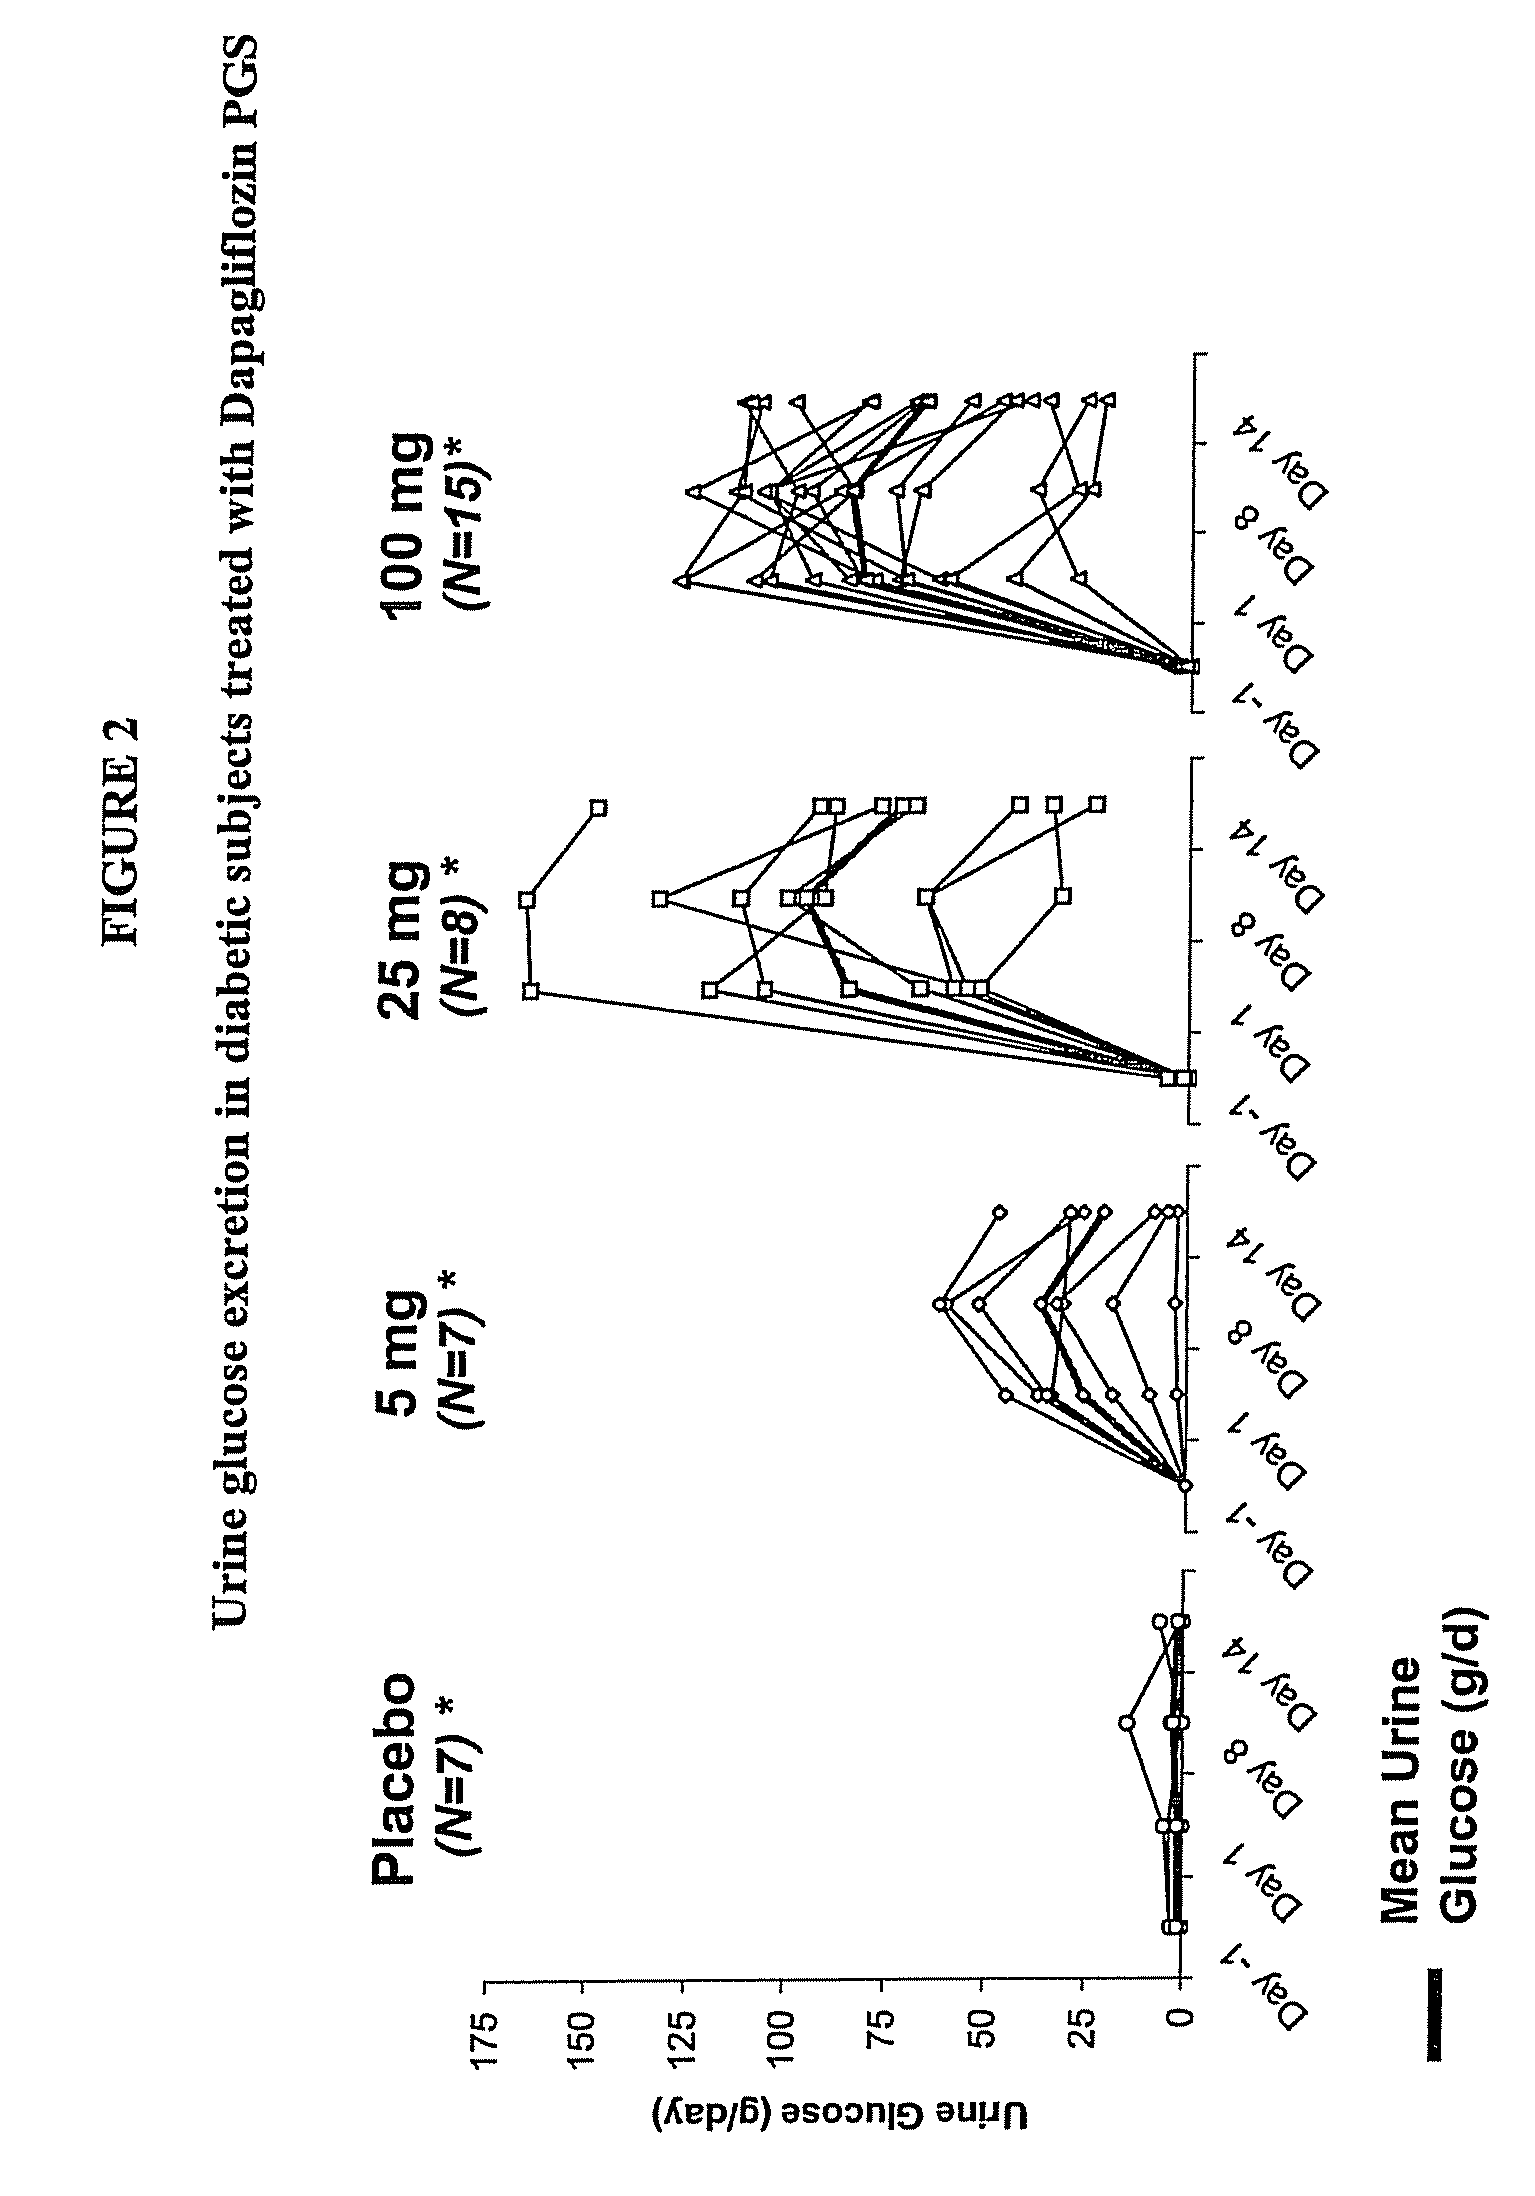 Methods for treating obesity employing an SGLT2 inhibitor